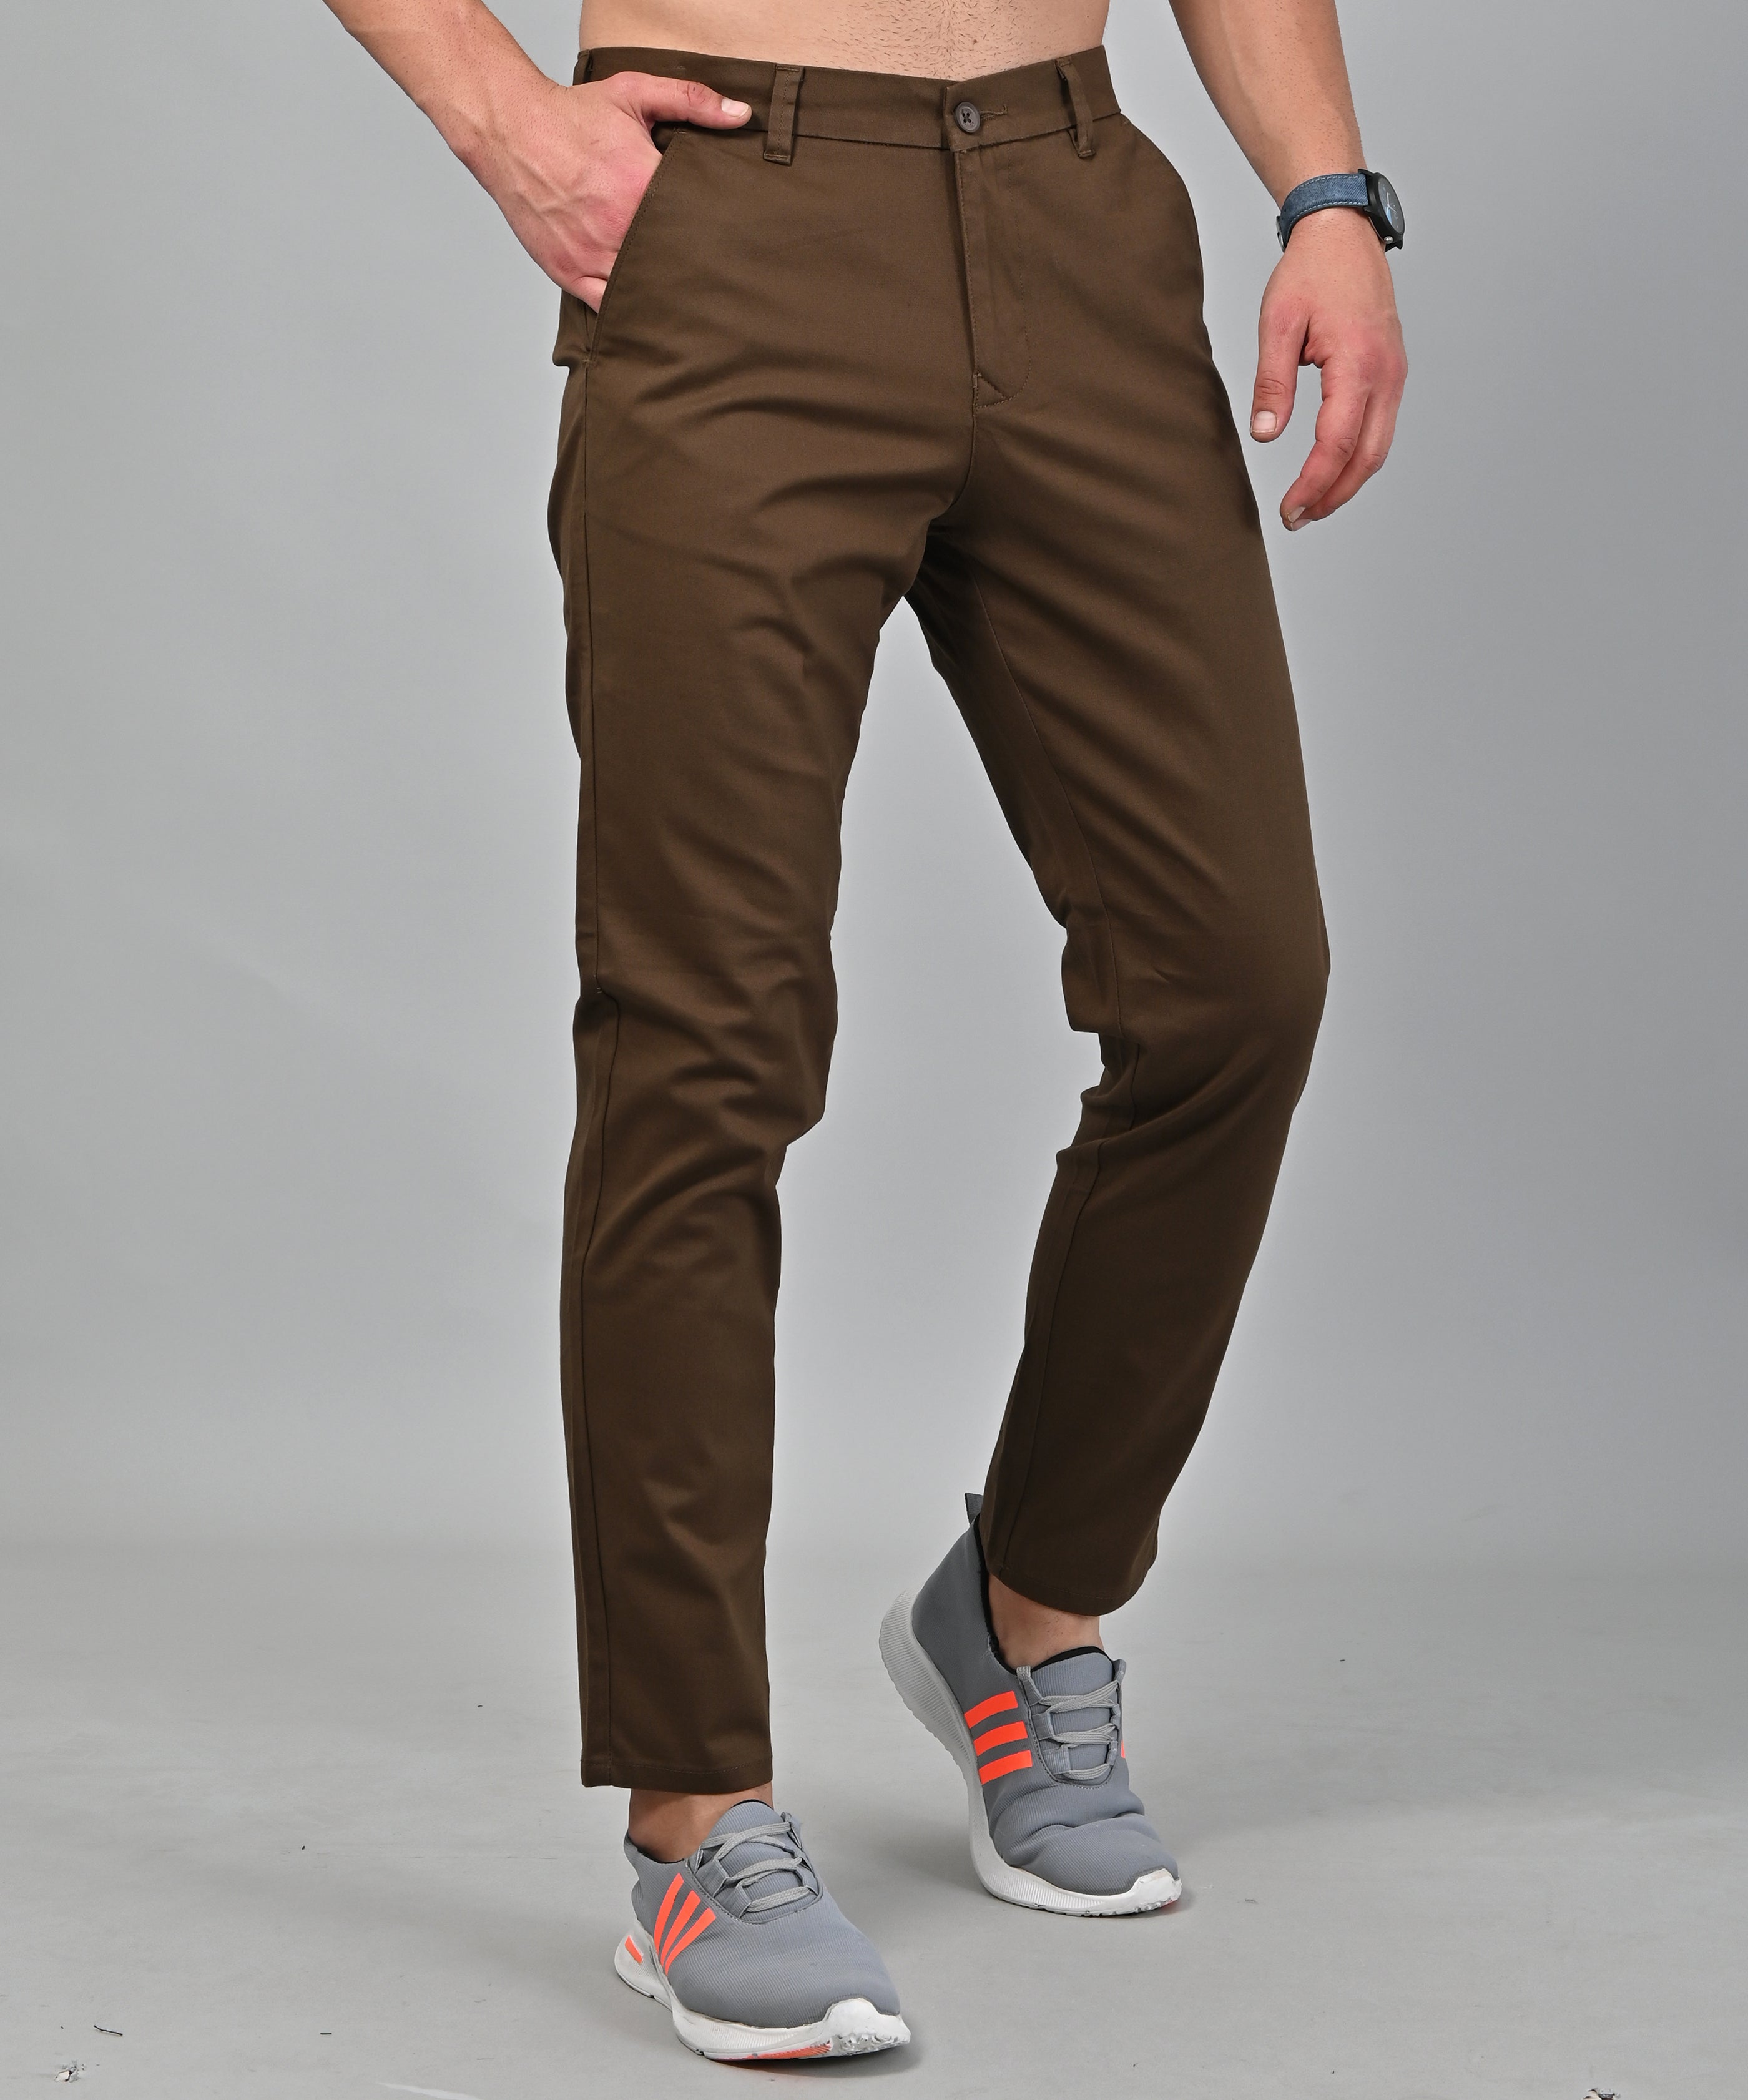 Na Nin Townes Cotton Twill Trouser / Available in Khaki & Onyx | Fashion  outfits, Aesthetic clothes, Cool outfits